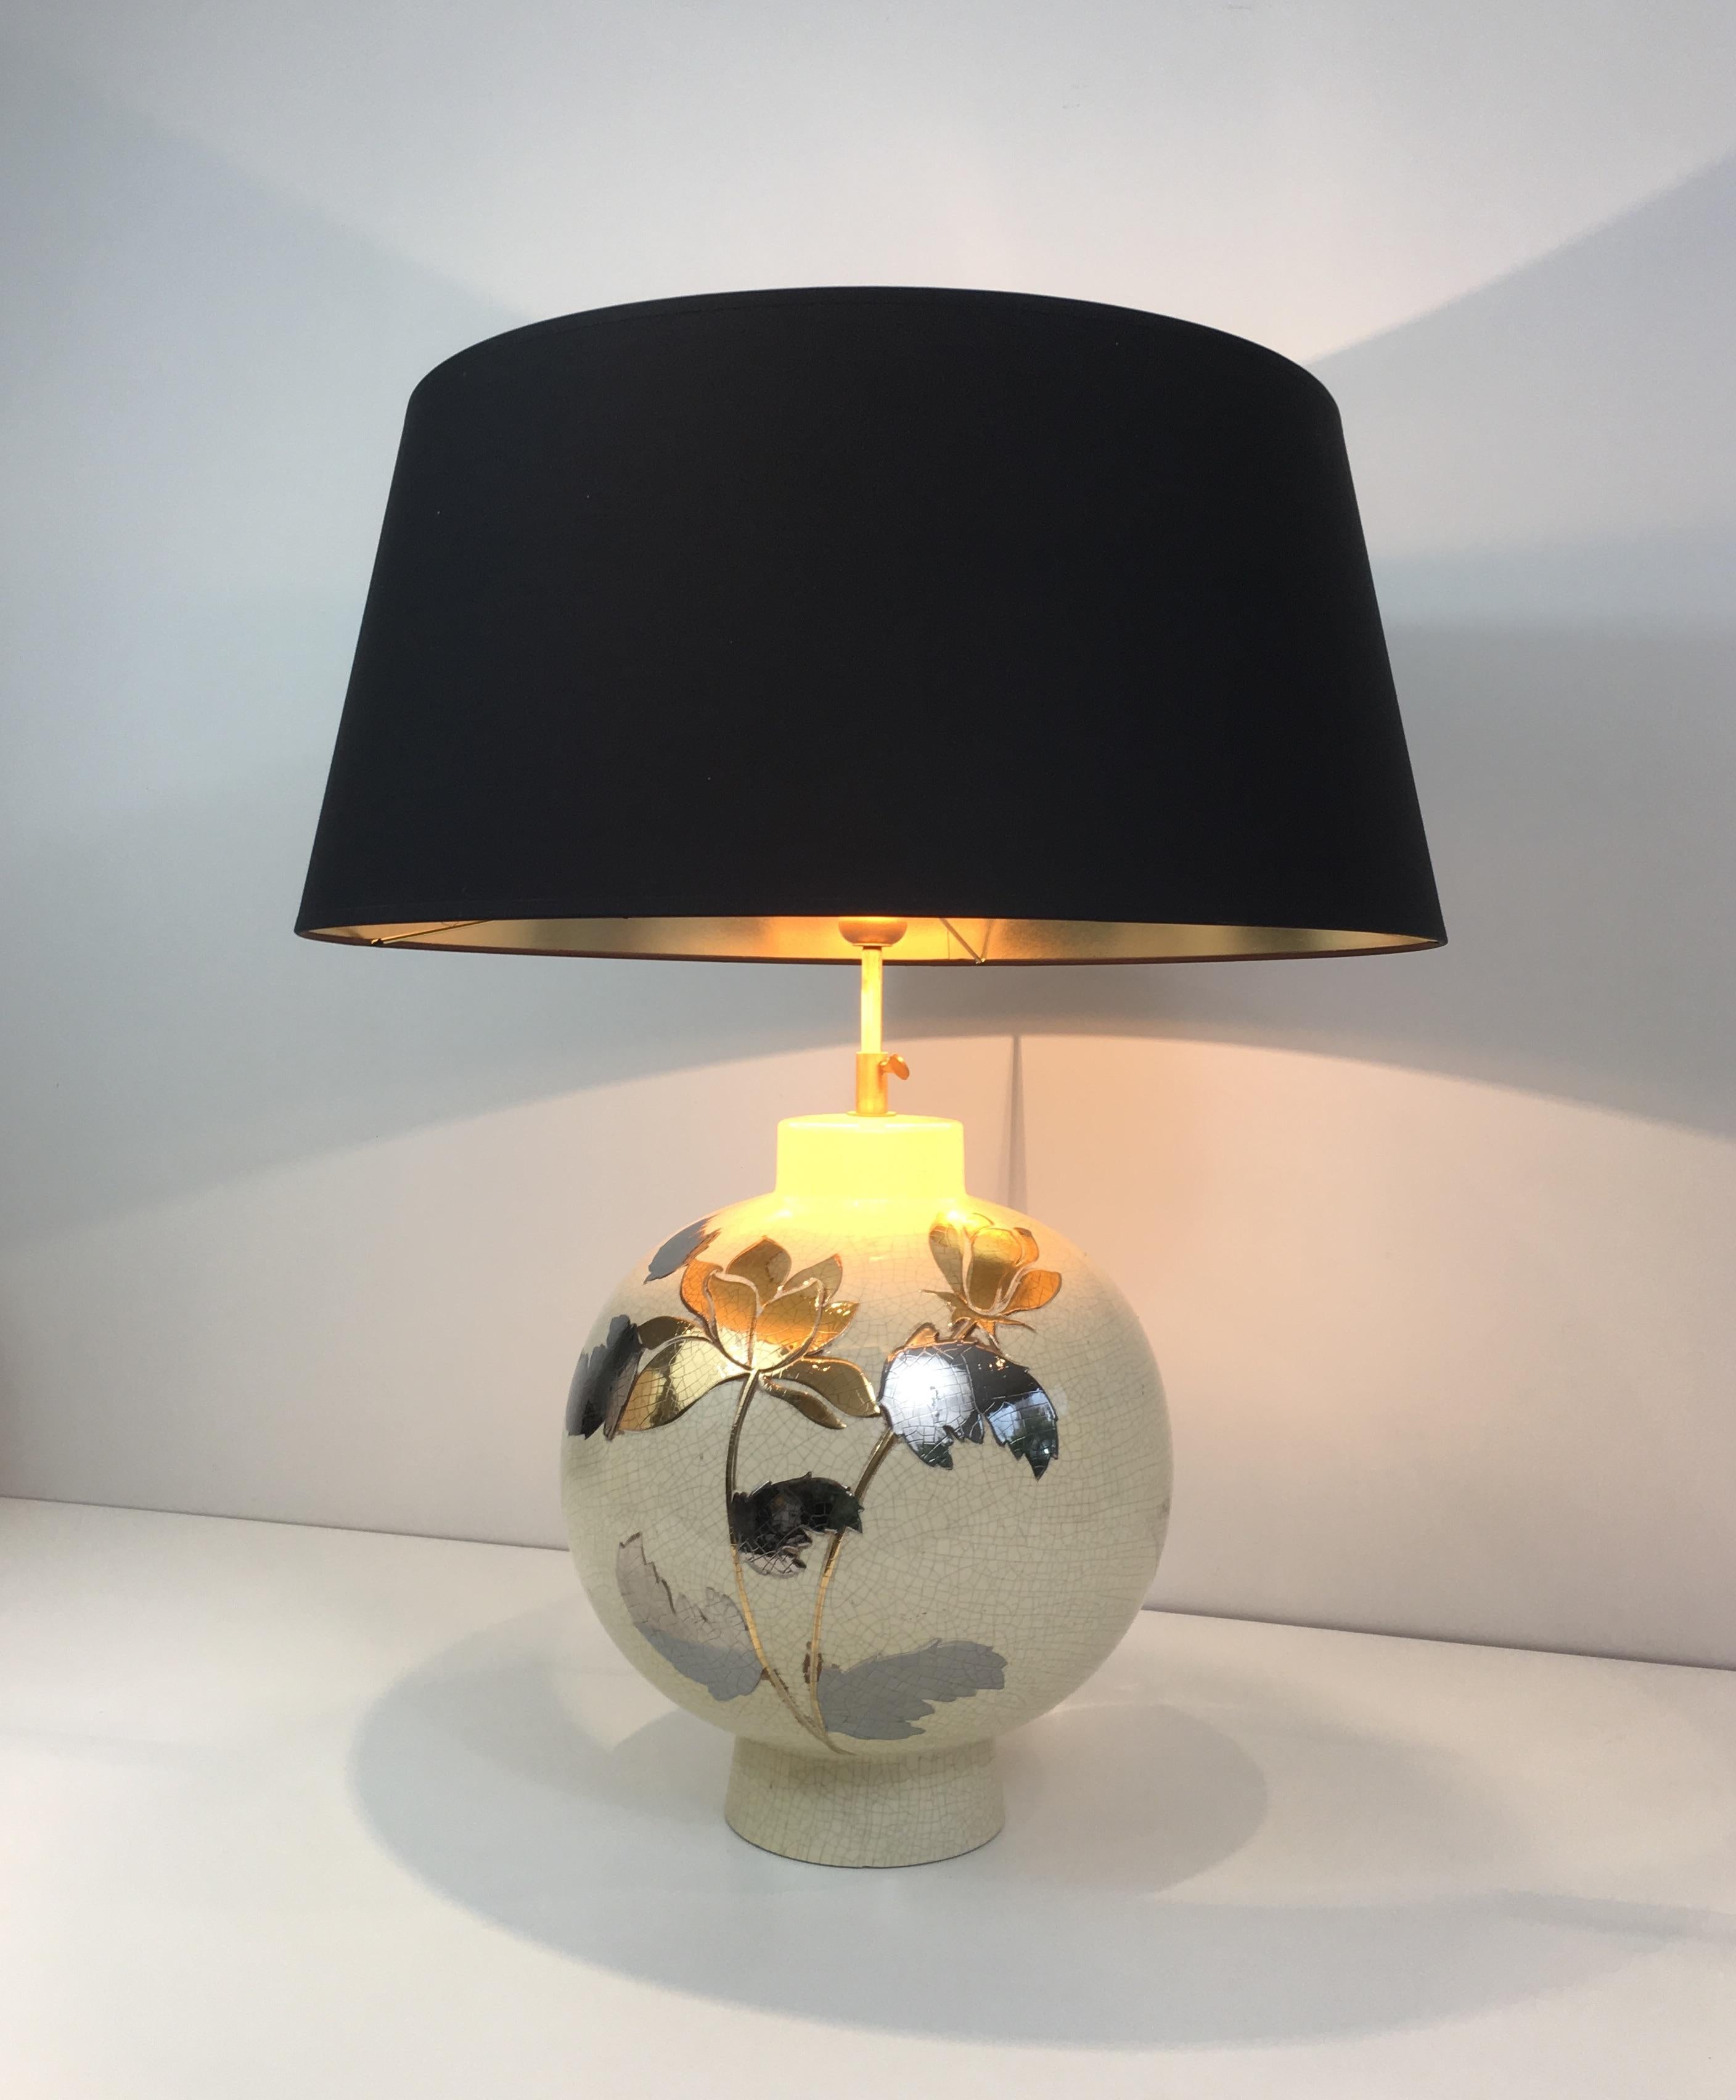 By L Drummer, Cracked Ceramic Lamp with Silver and Gold Flower Decoration on the 9